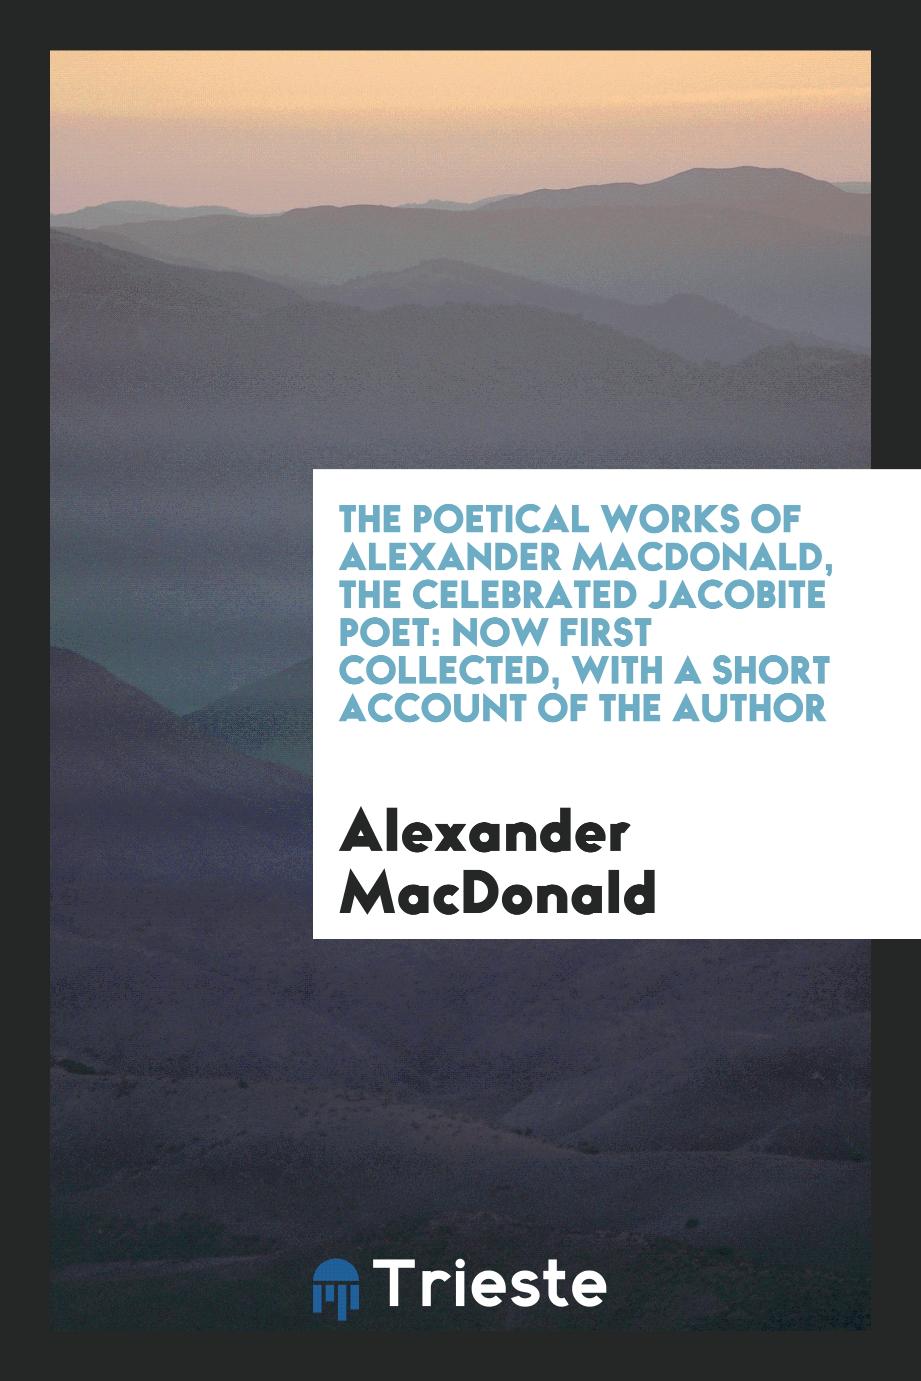 The poetical works of Alexander Macdonald, the celebrated Jacobite poet: now first collected, with a short account of the author